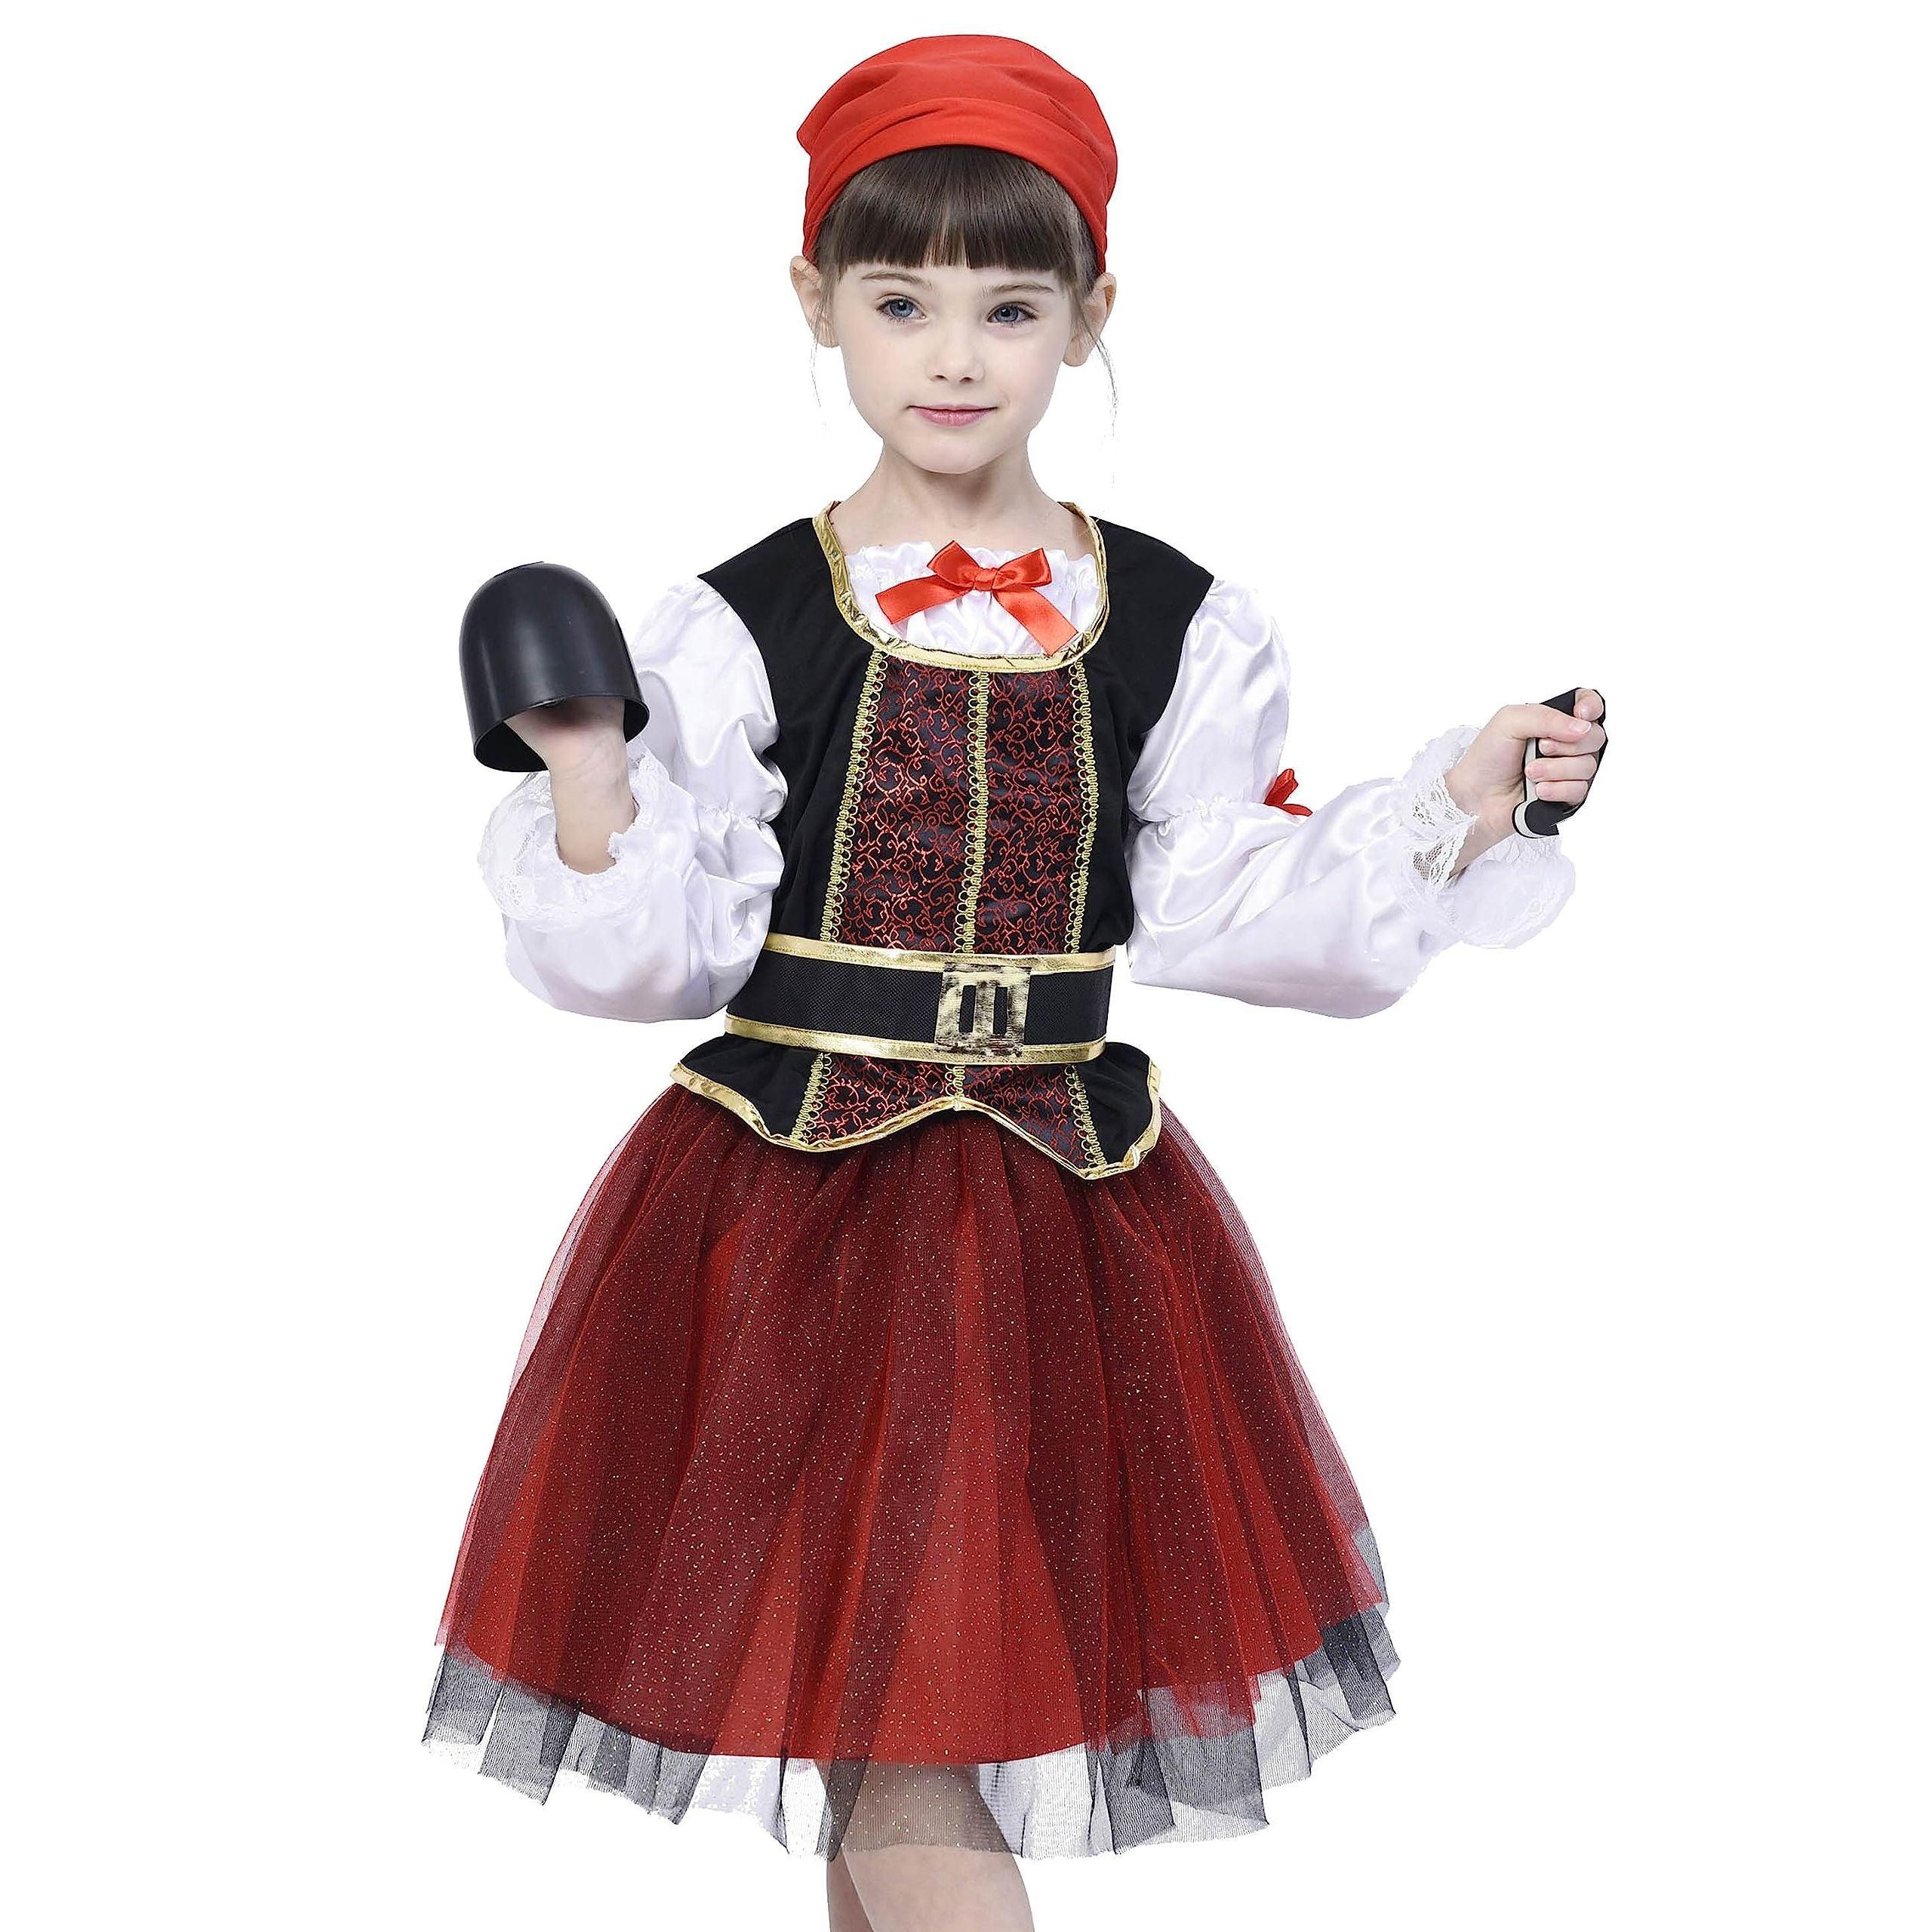 IKALI Pirate Costume for Girls, Deluxe Buccaneer Fancy Dress Outfit (6pcs Set) Animal Dress Outfit Halloween Princess Role-play